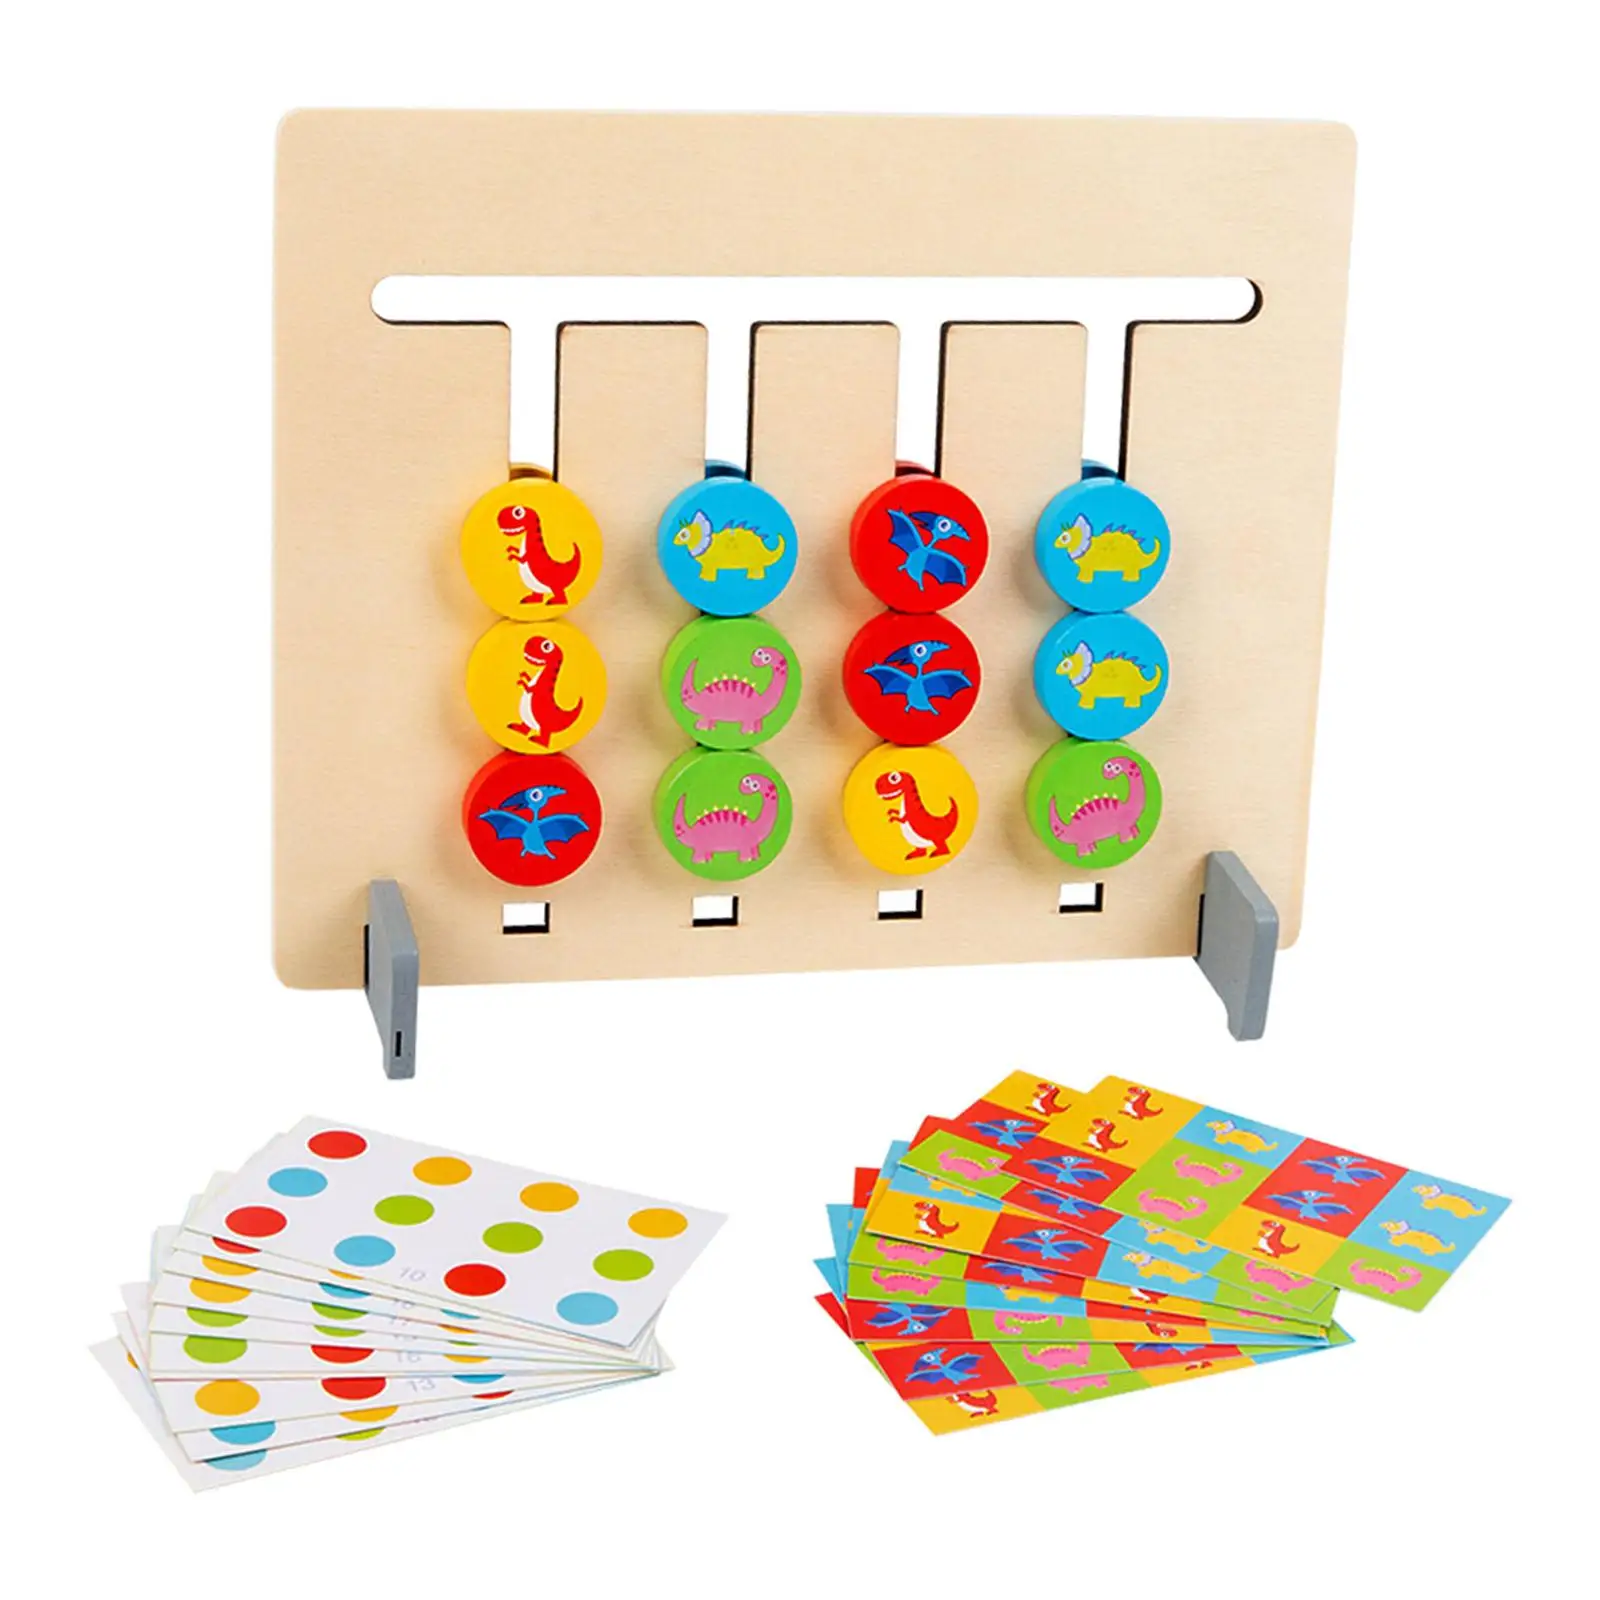 Montessori Slide Puzzle Toy Game Educational Learning Toy Wooden Board Game Blocks Puzzle Brain Teaser Jigsaw for Preschool Kids